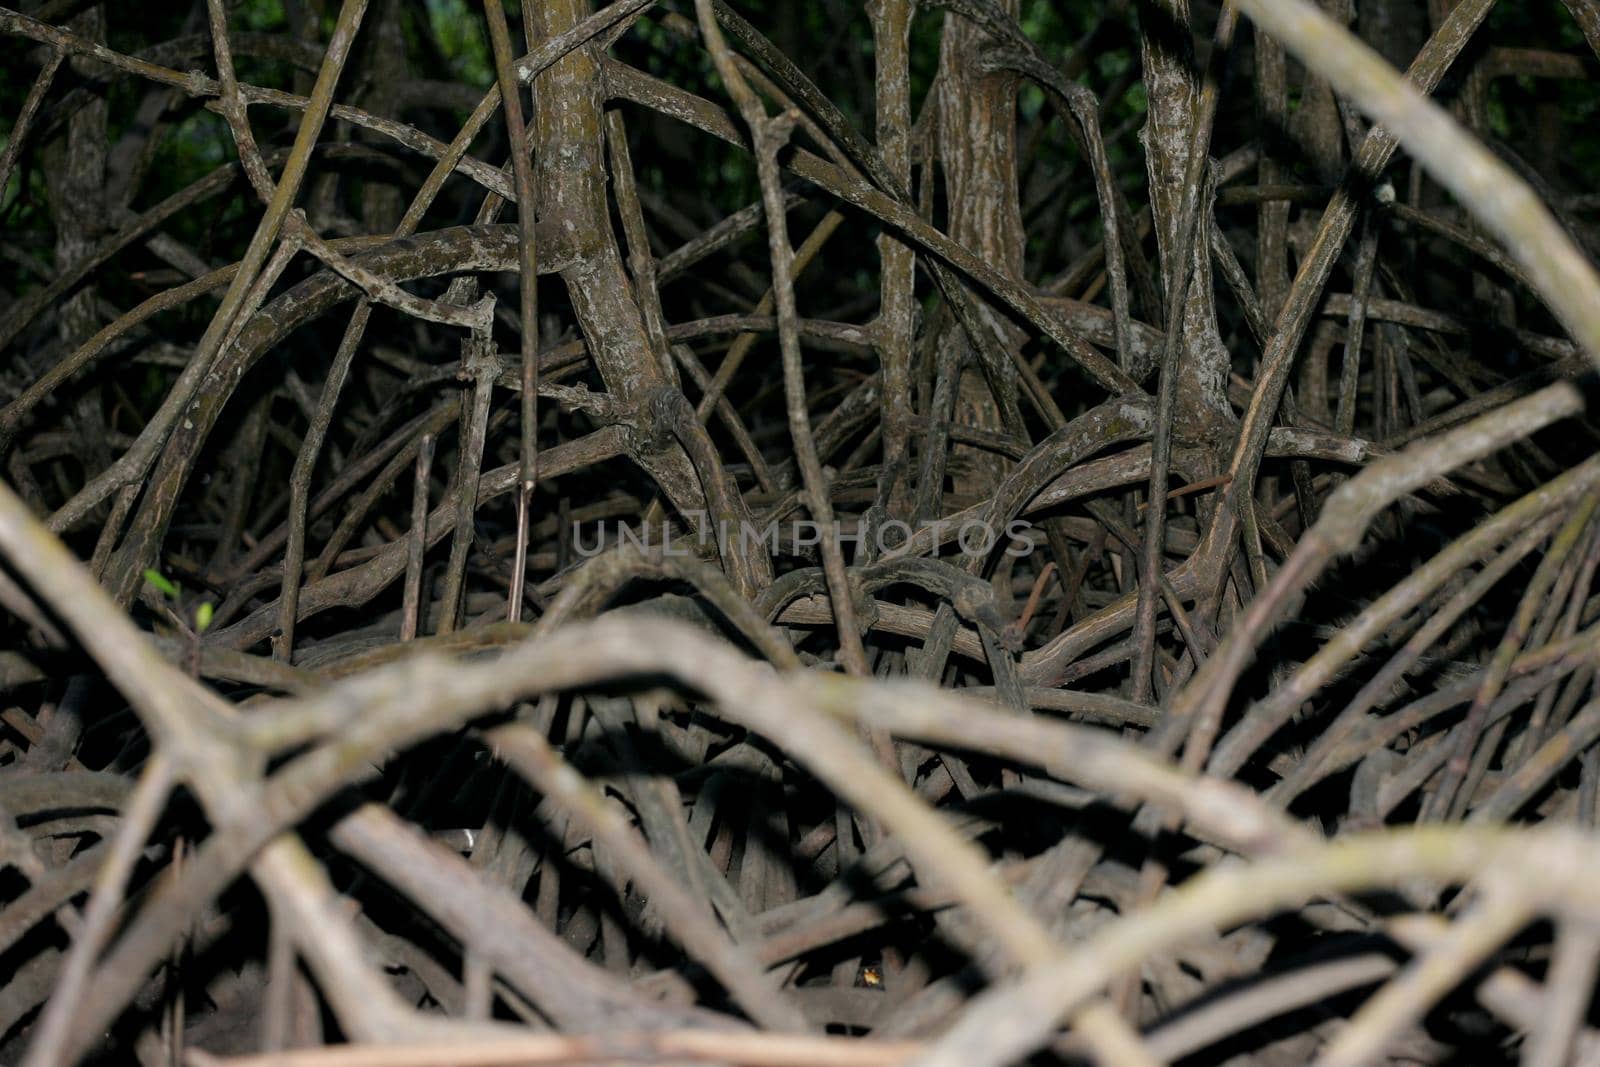 conde, bahia / brazil - march 28, 2013: mangrove roots are seen at the mouth of the Itapucuru River in the district of Siribinha, municipality of Conde.
